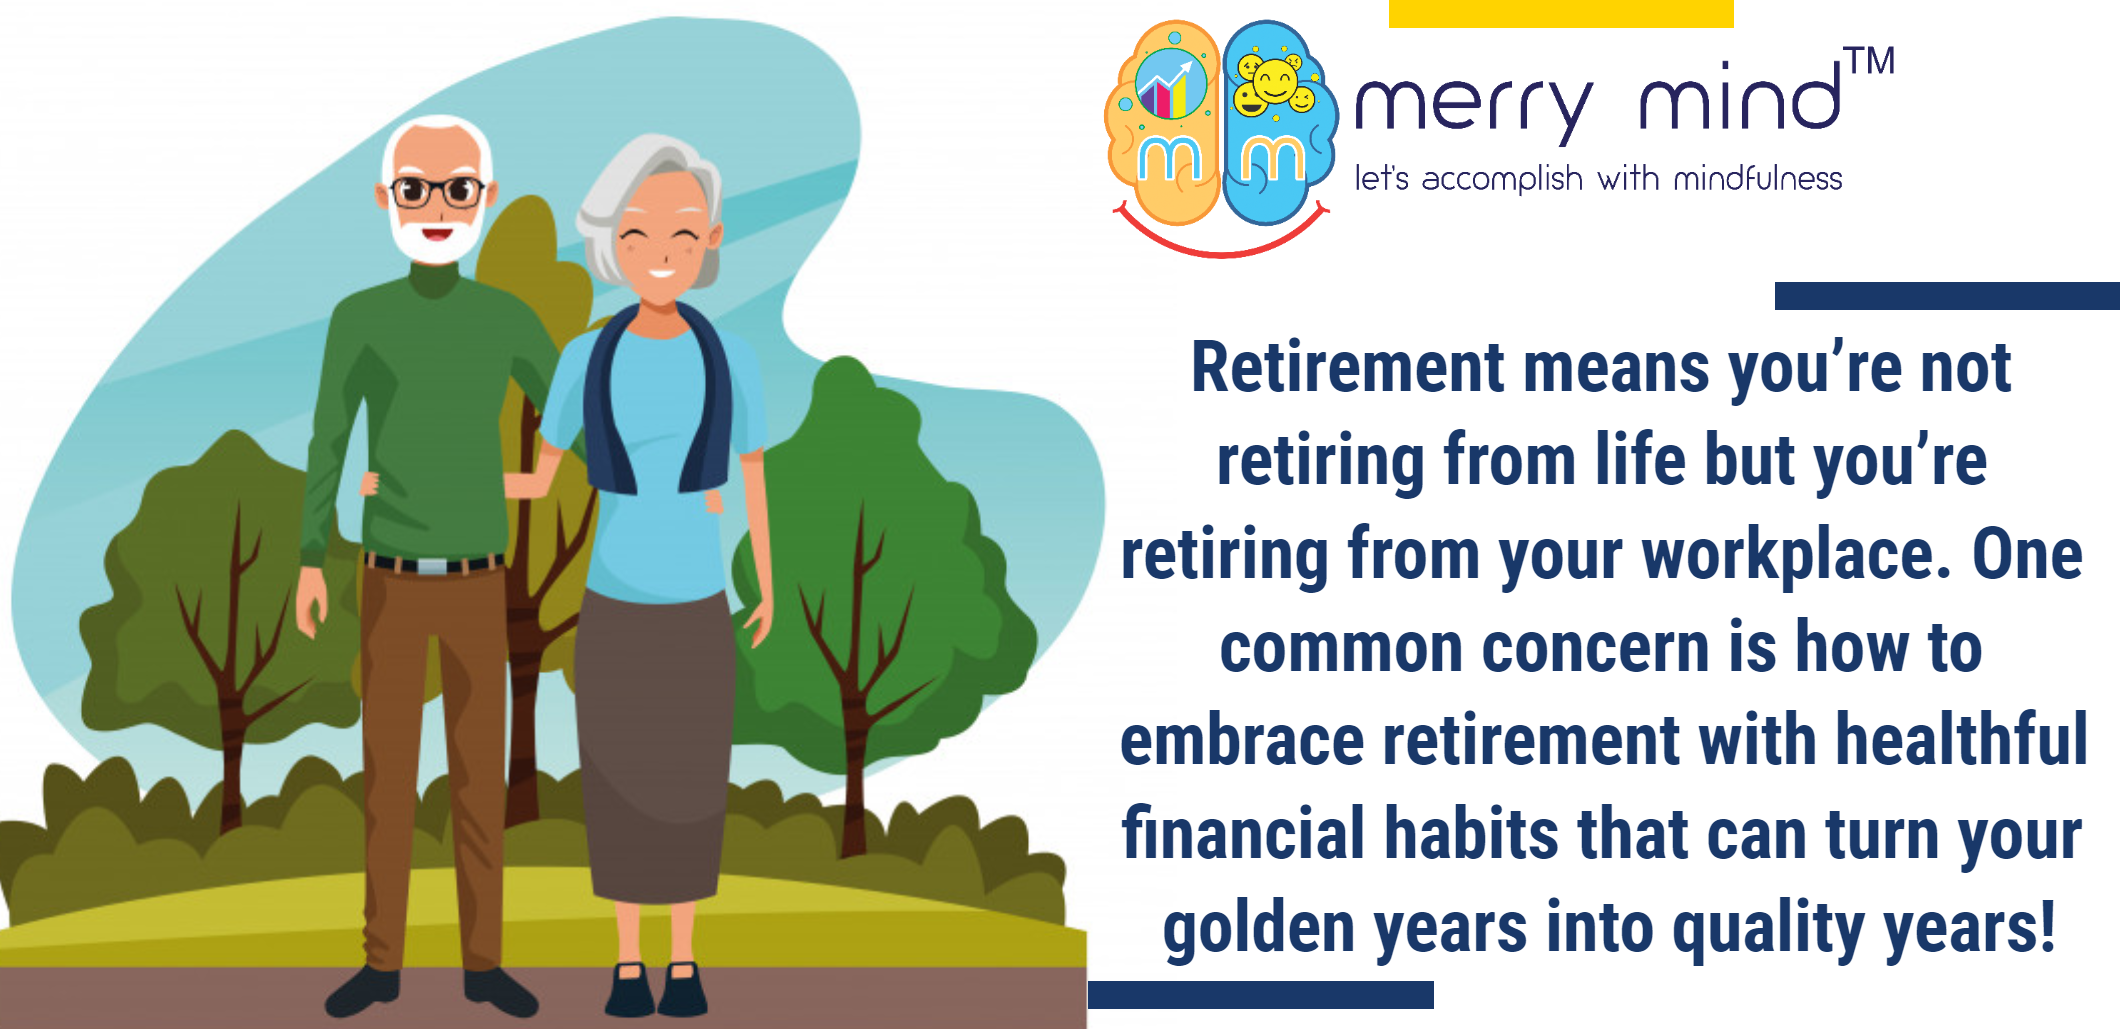 Retirement Planning processes enables you to make provisions so as to enjoy your retired life.